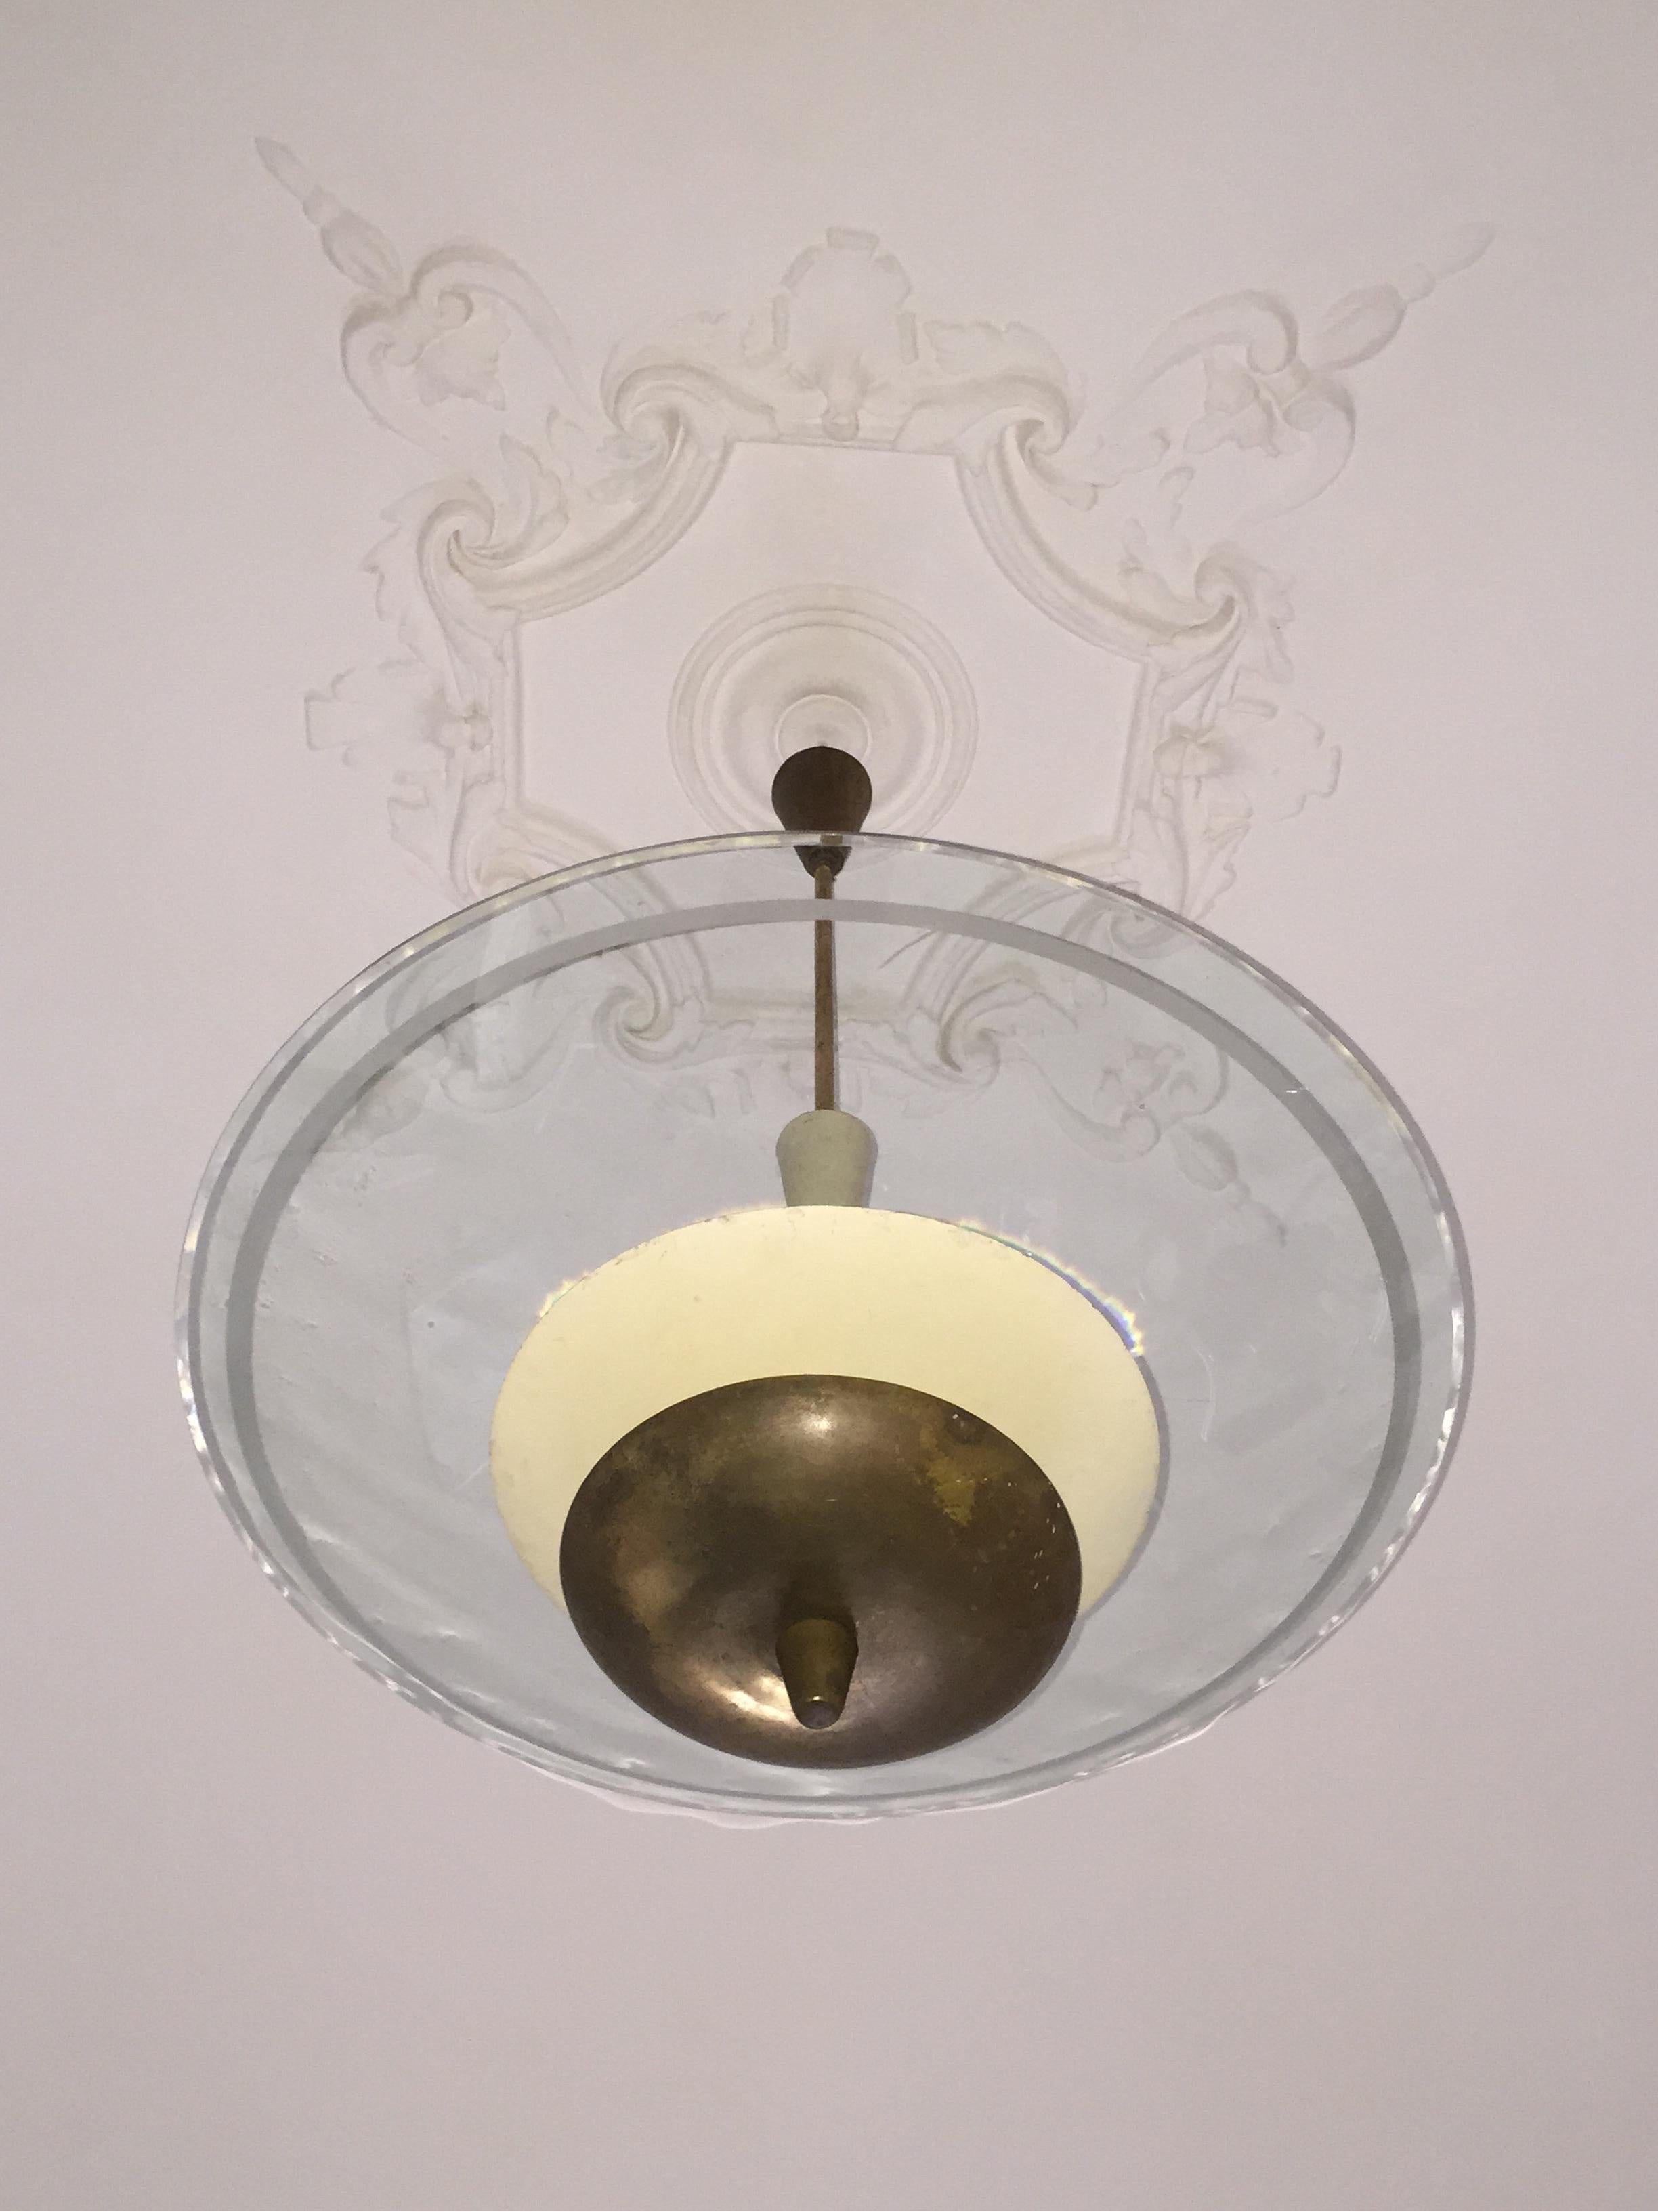 Italian Fontana Arte chandelier from 1950. Curved glass, brass and lacquer. Diameter about 70 cm. Height 110 cm.